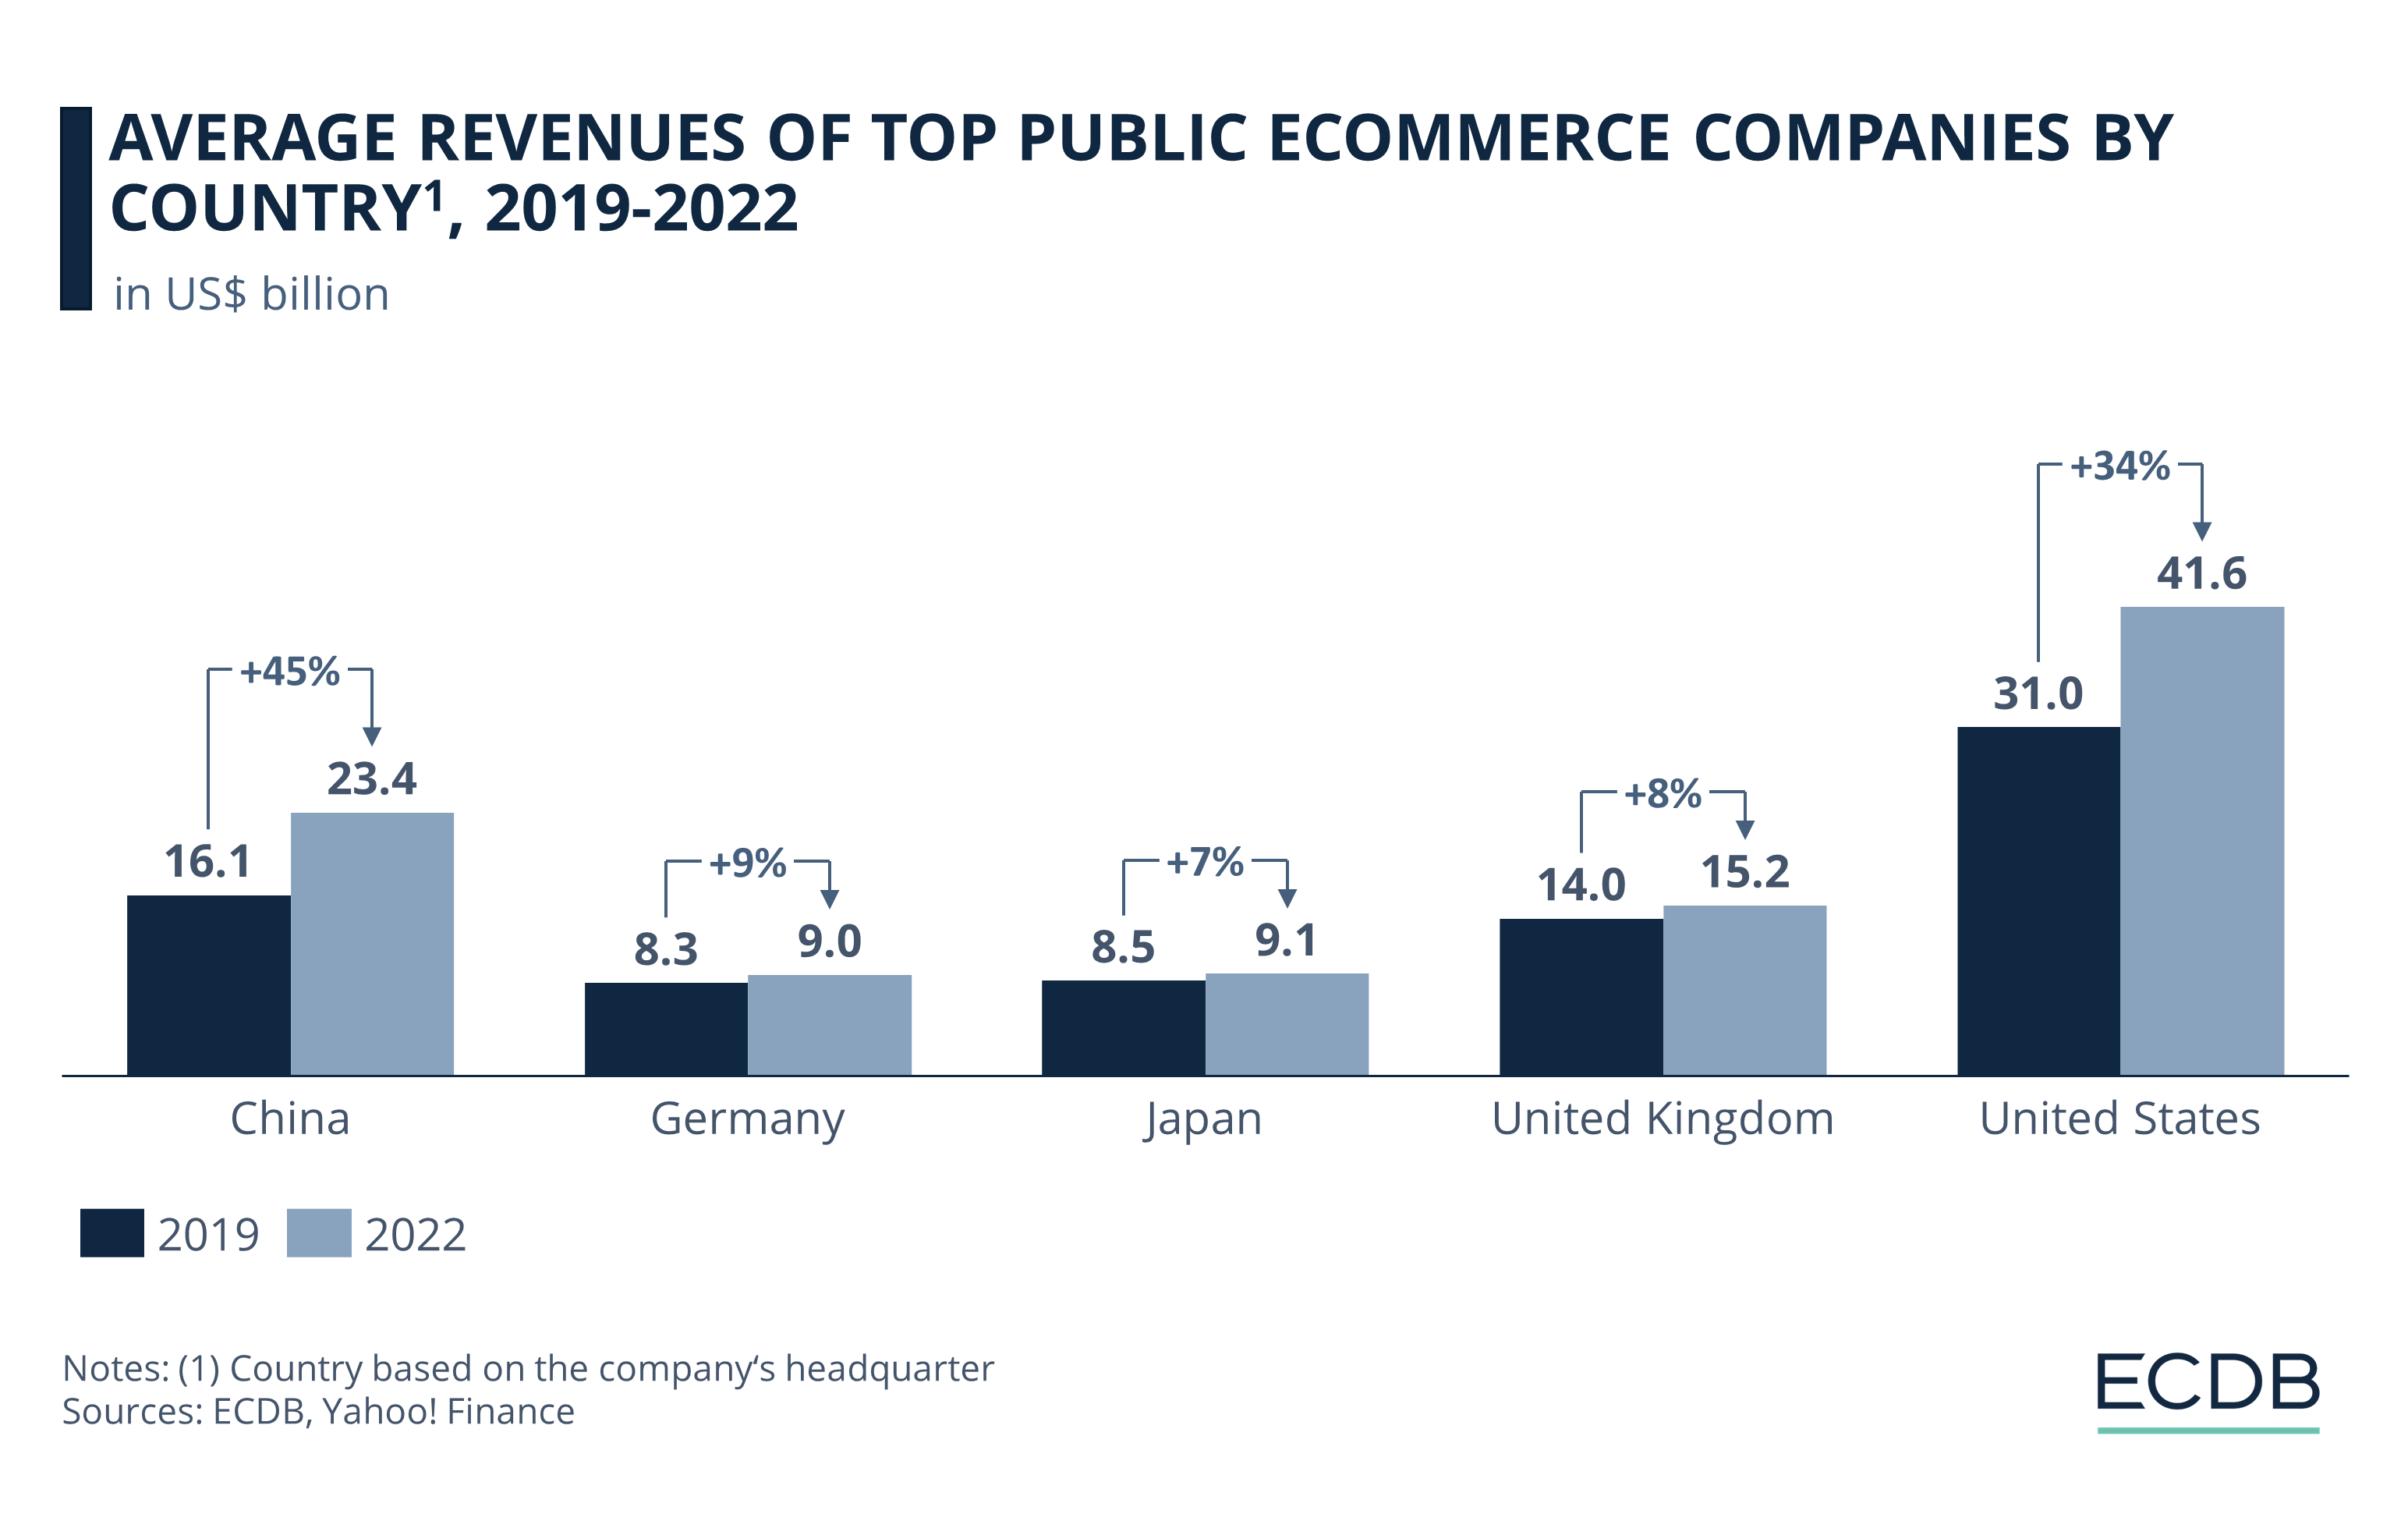 Average Revenues of Top Public eCommerce Companies by Country, 2019-2022